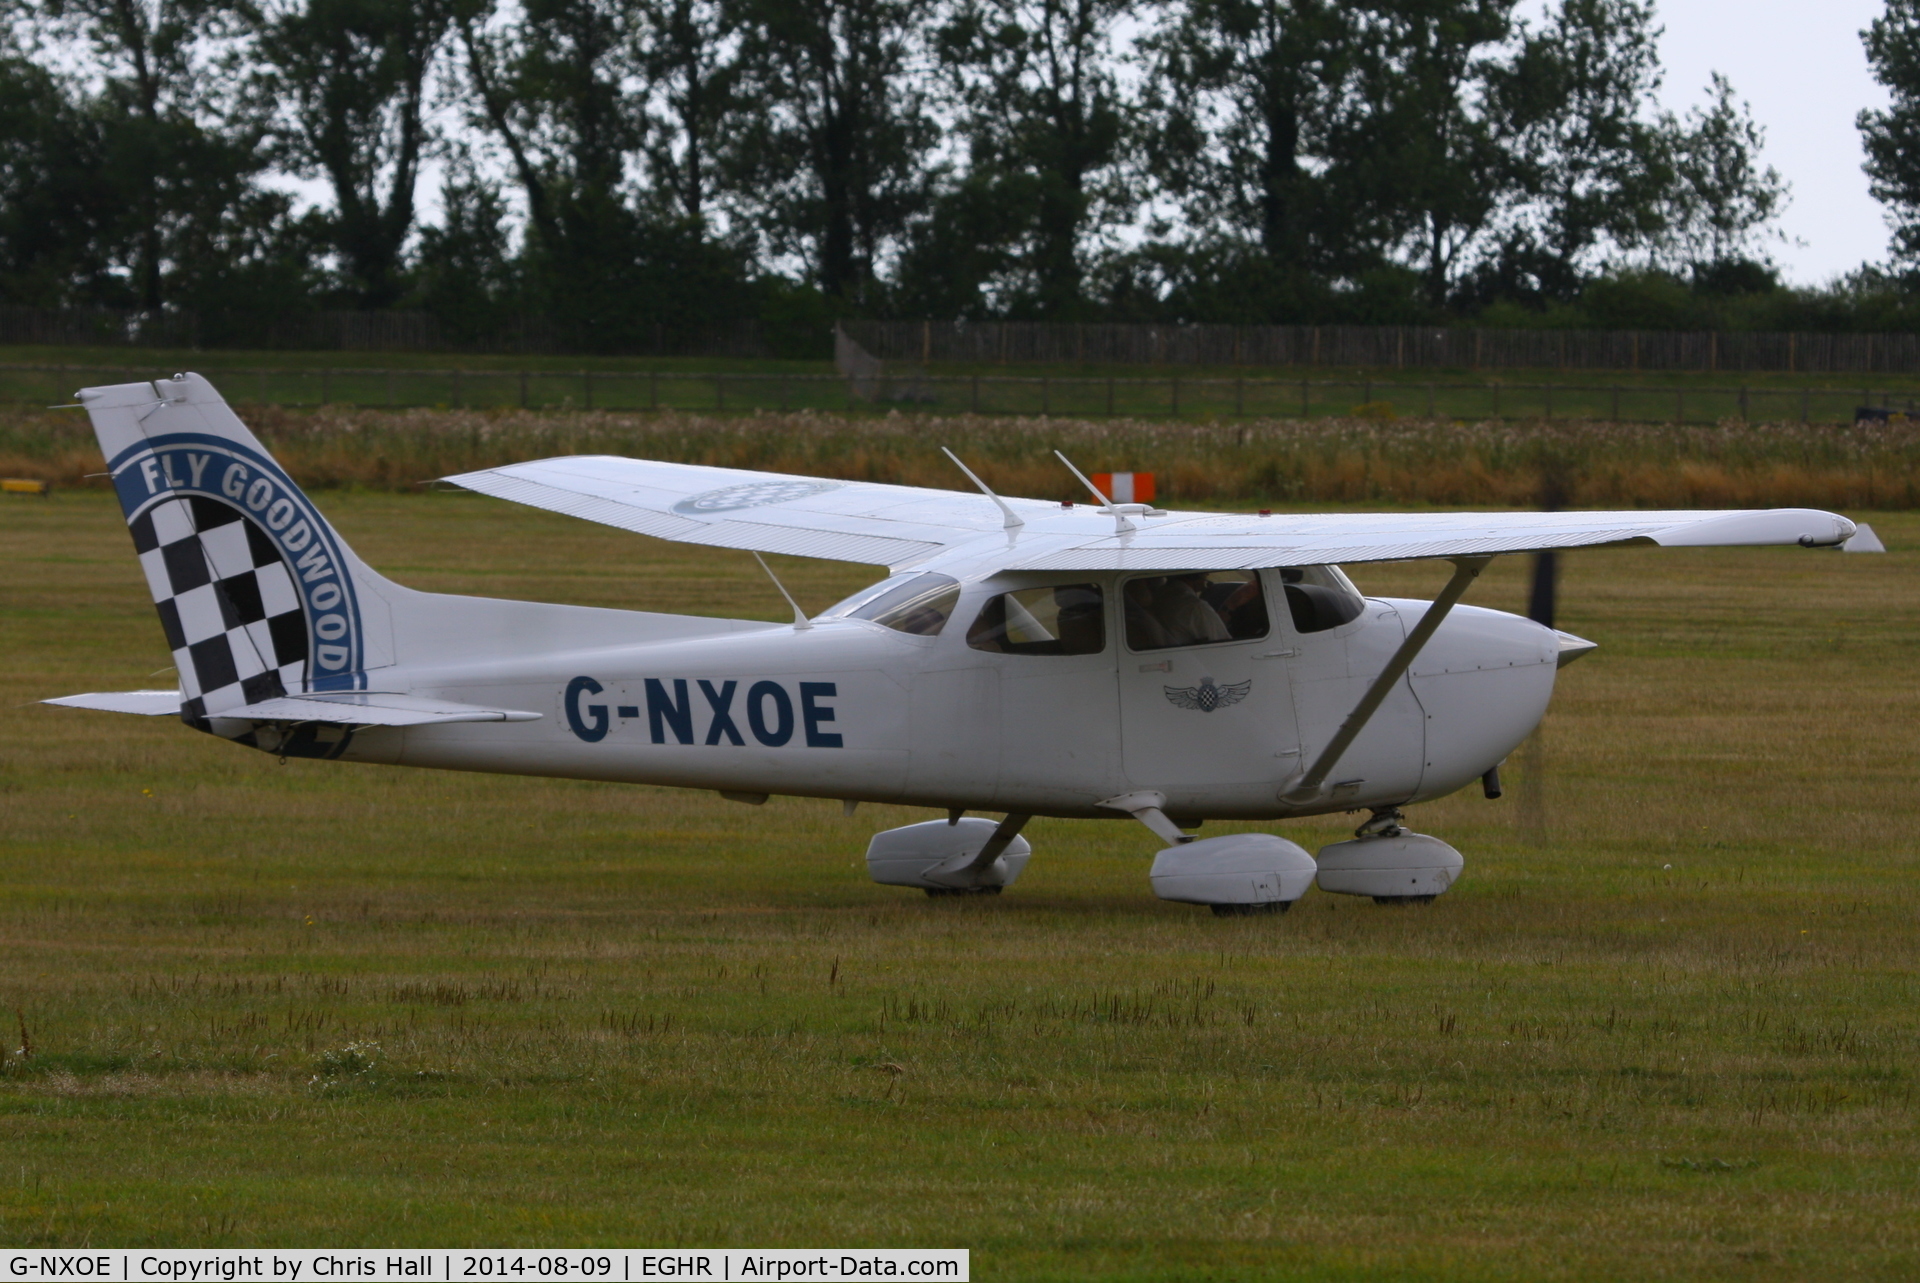 G-NXOE, 2010 Cessna 172S C/N 172S11002, at Goodwood airfield